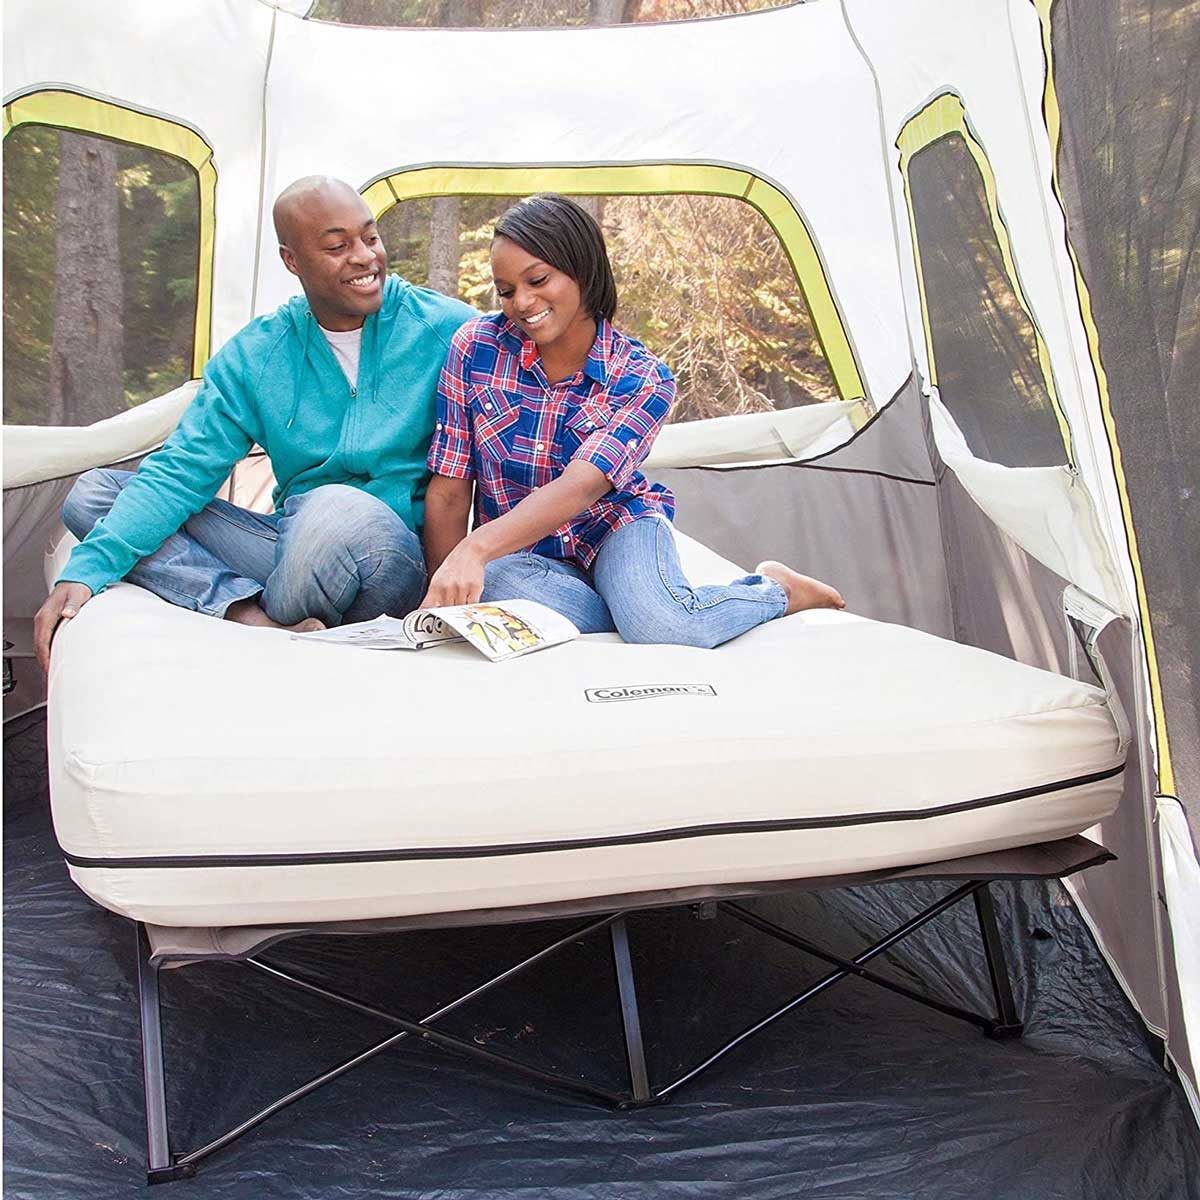 The 8 Best Sleeping Pads and Mattresses for Camping